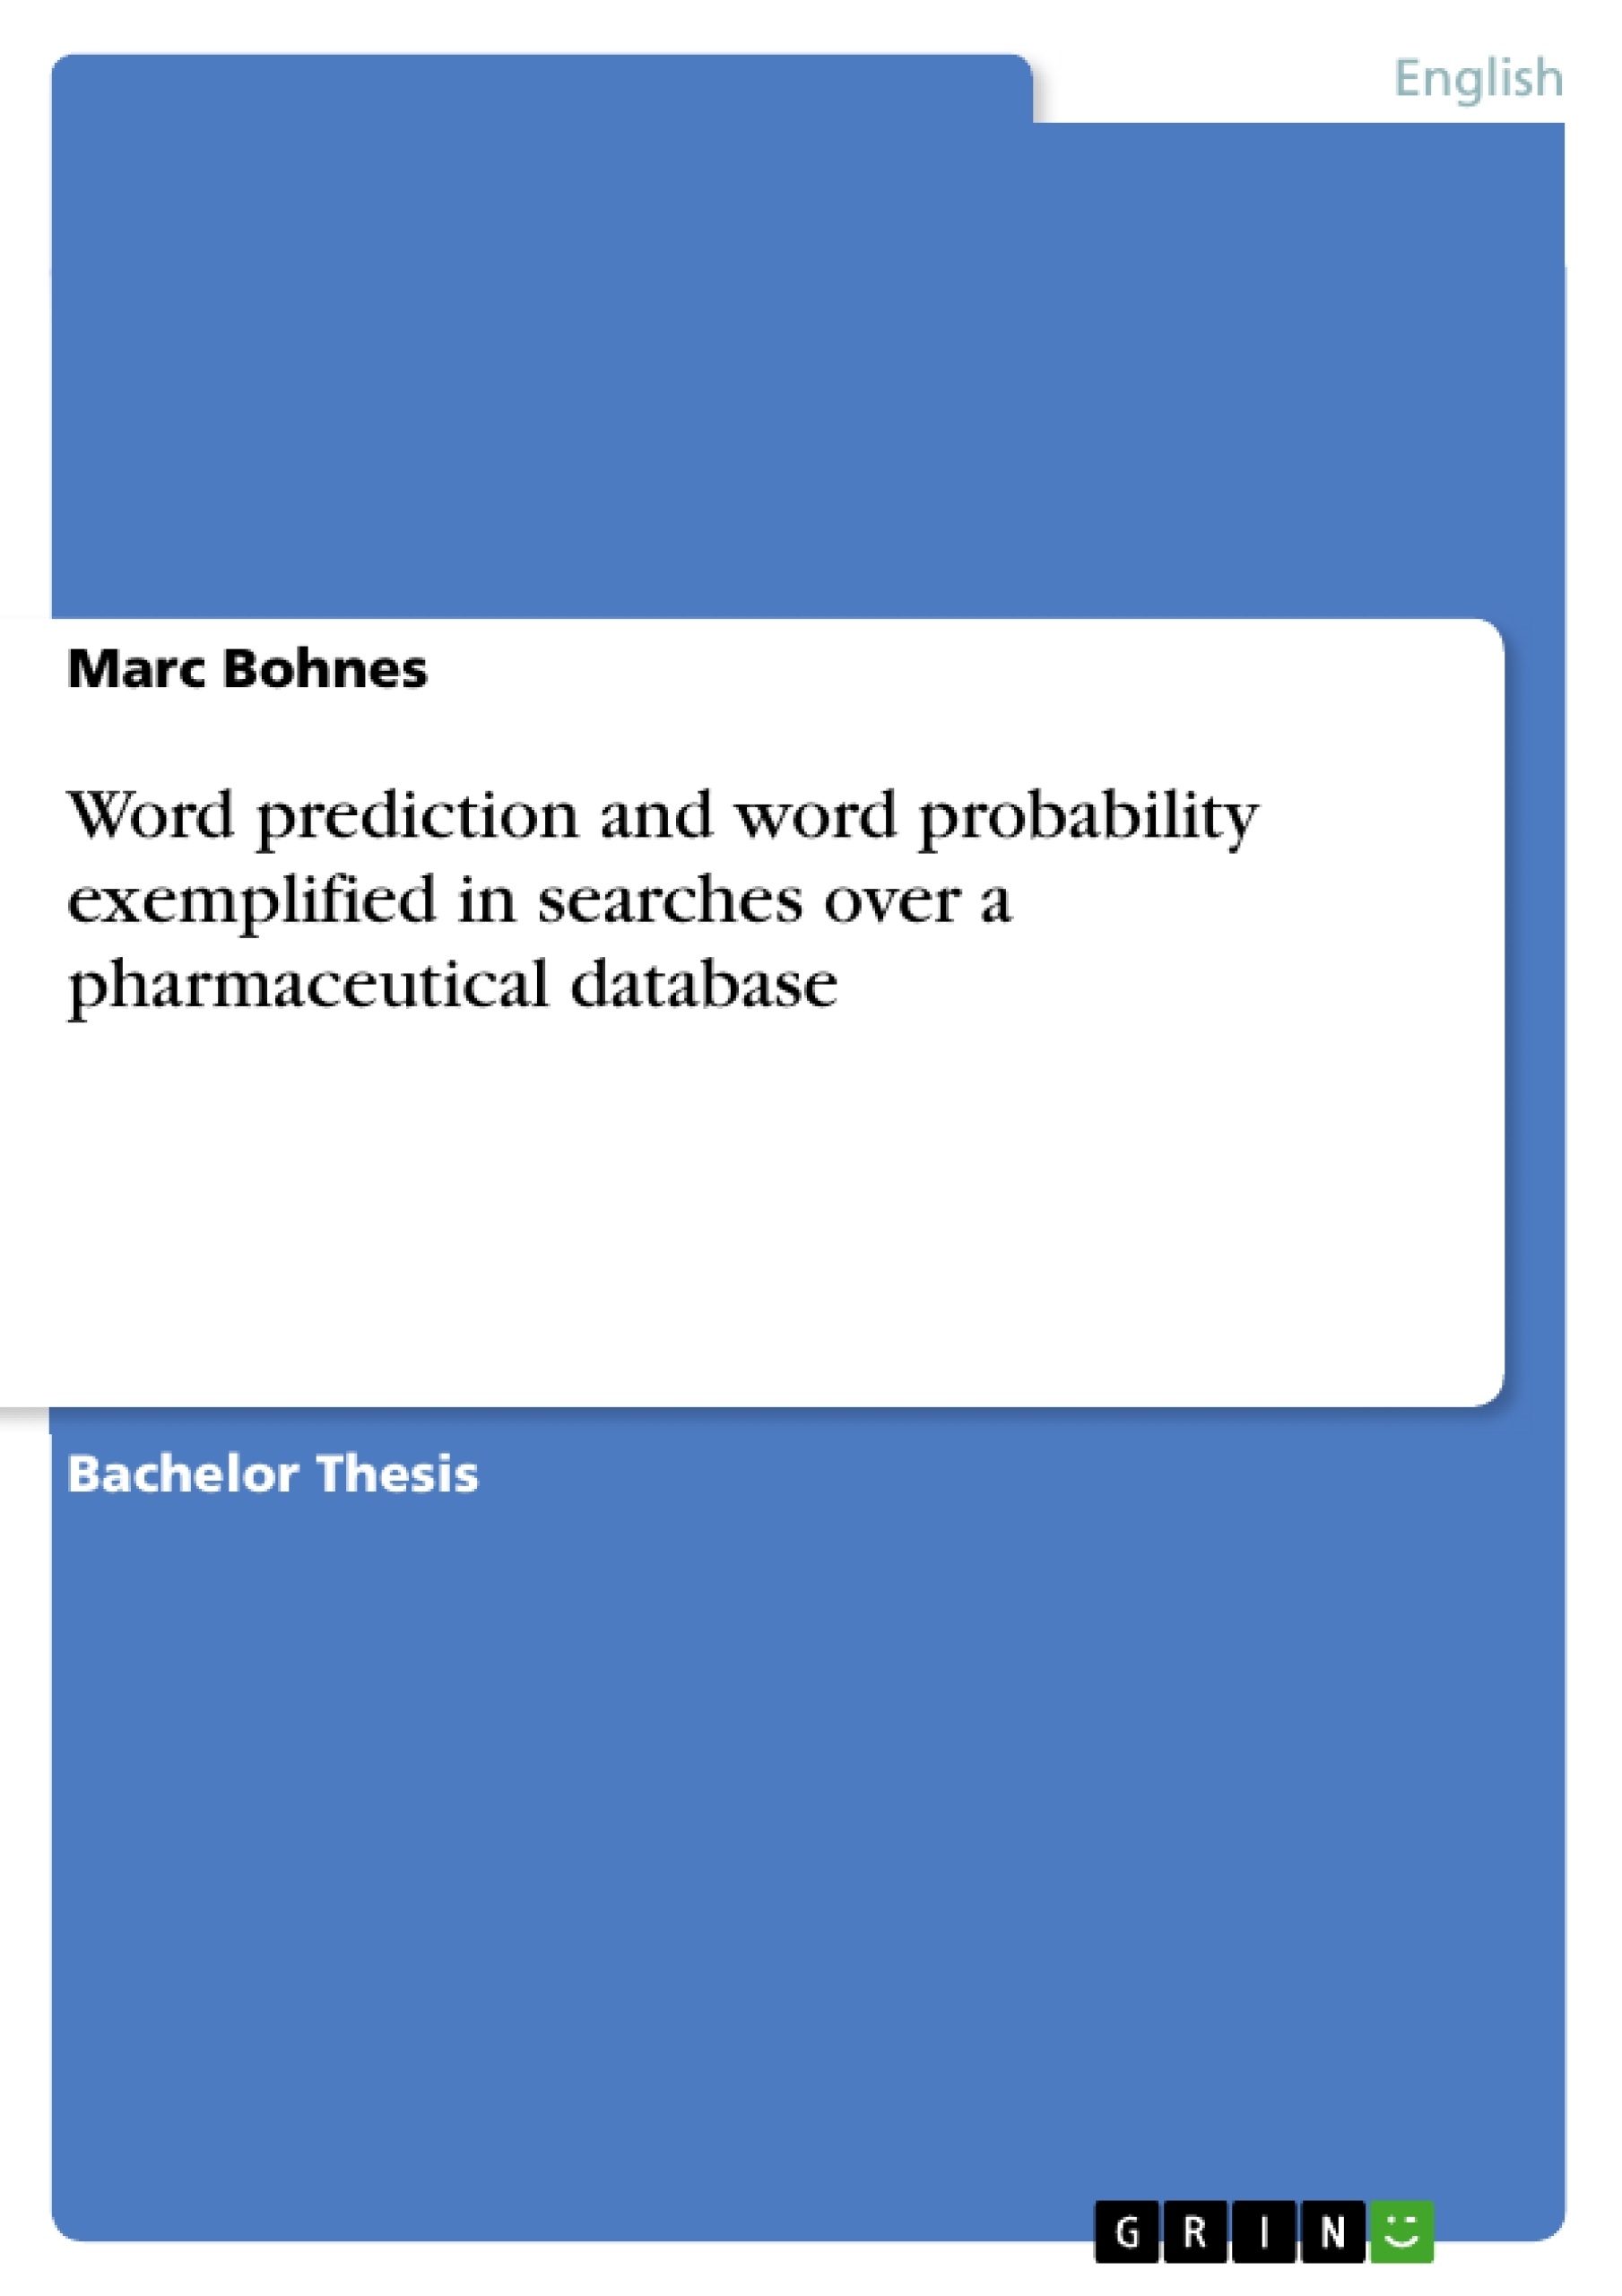 Title: Word prediction and word probability exemplified in searches over a pharmaceutical database